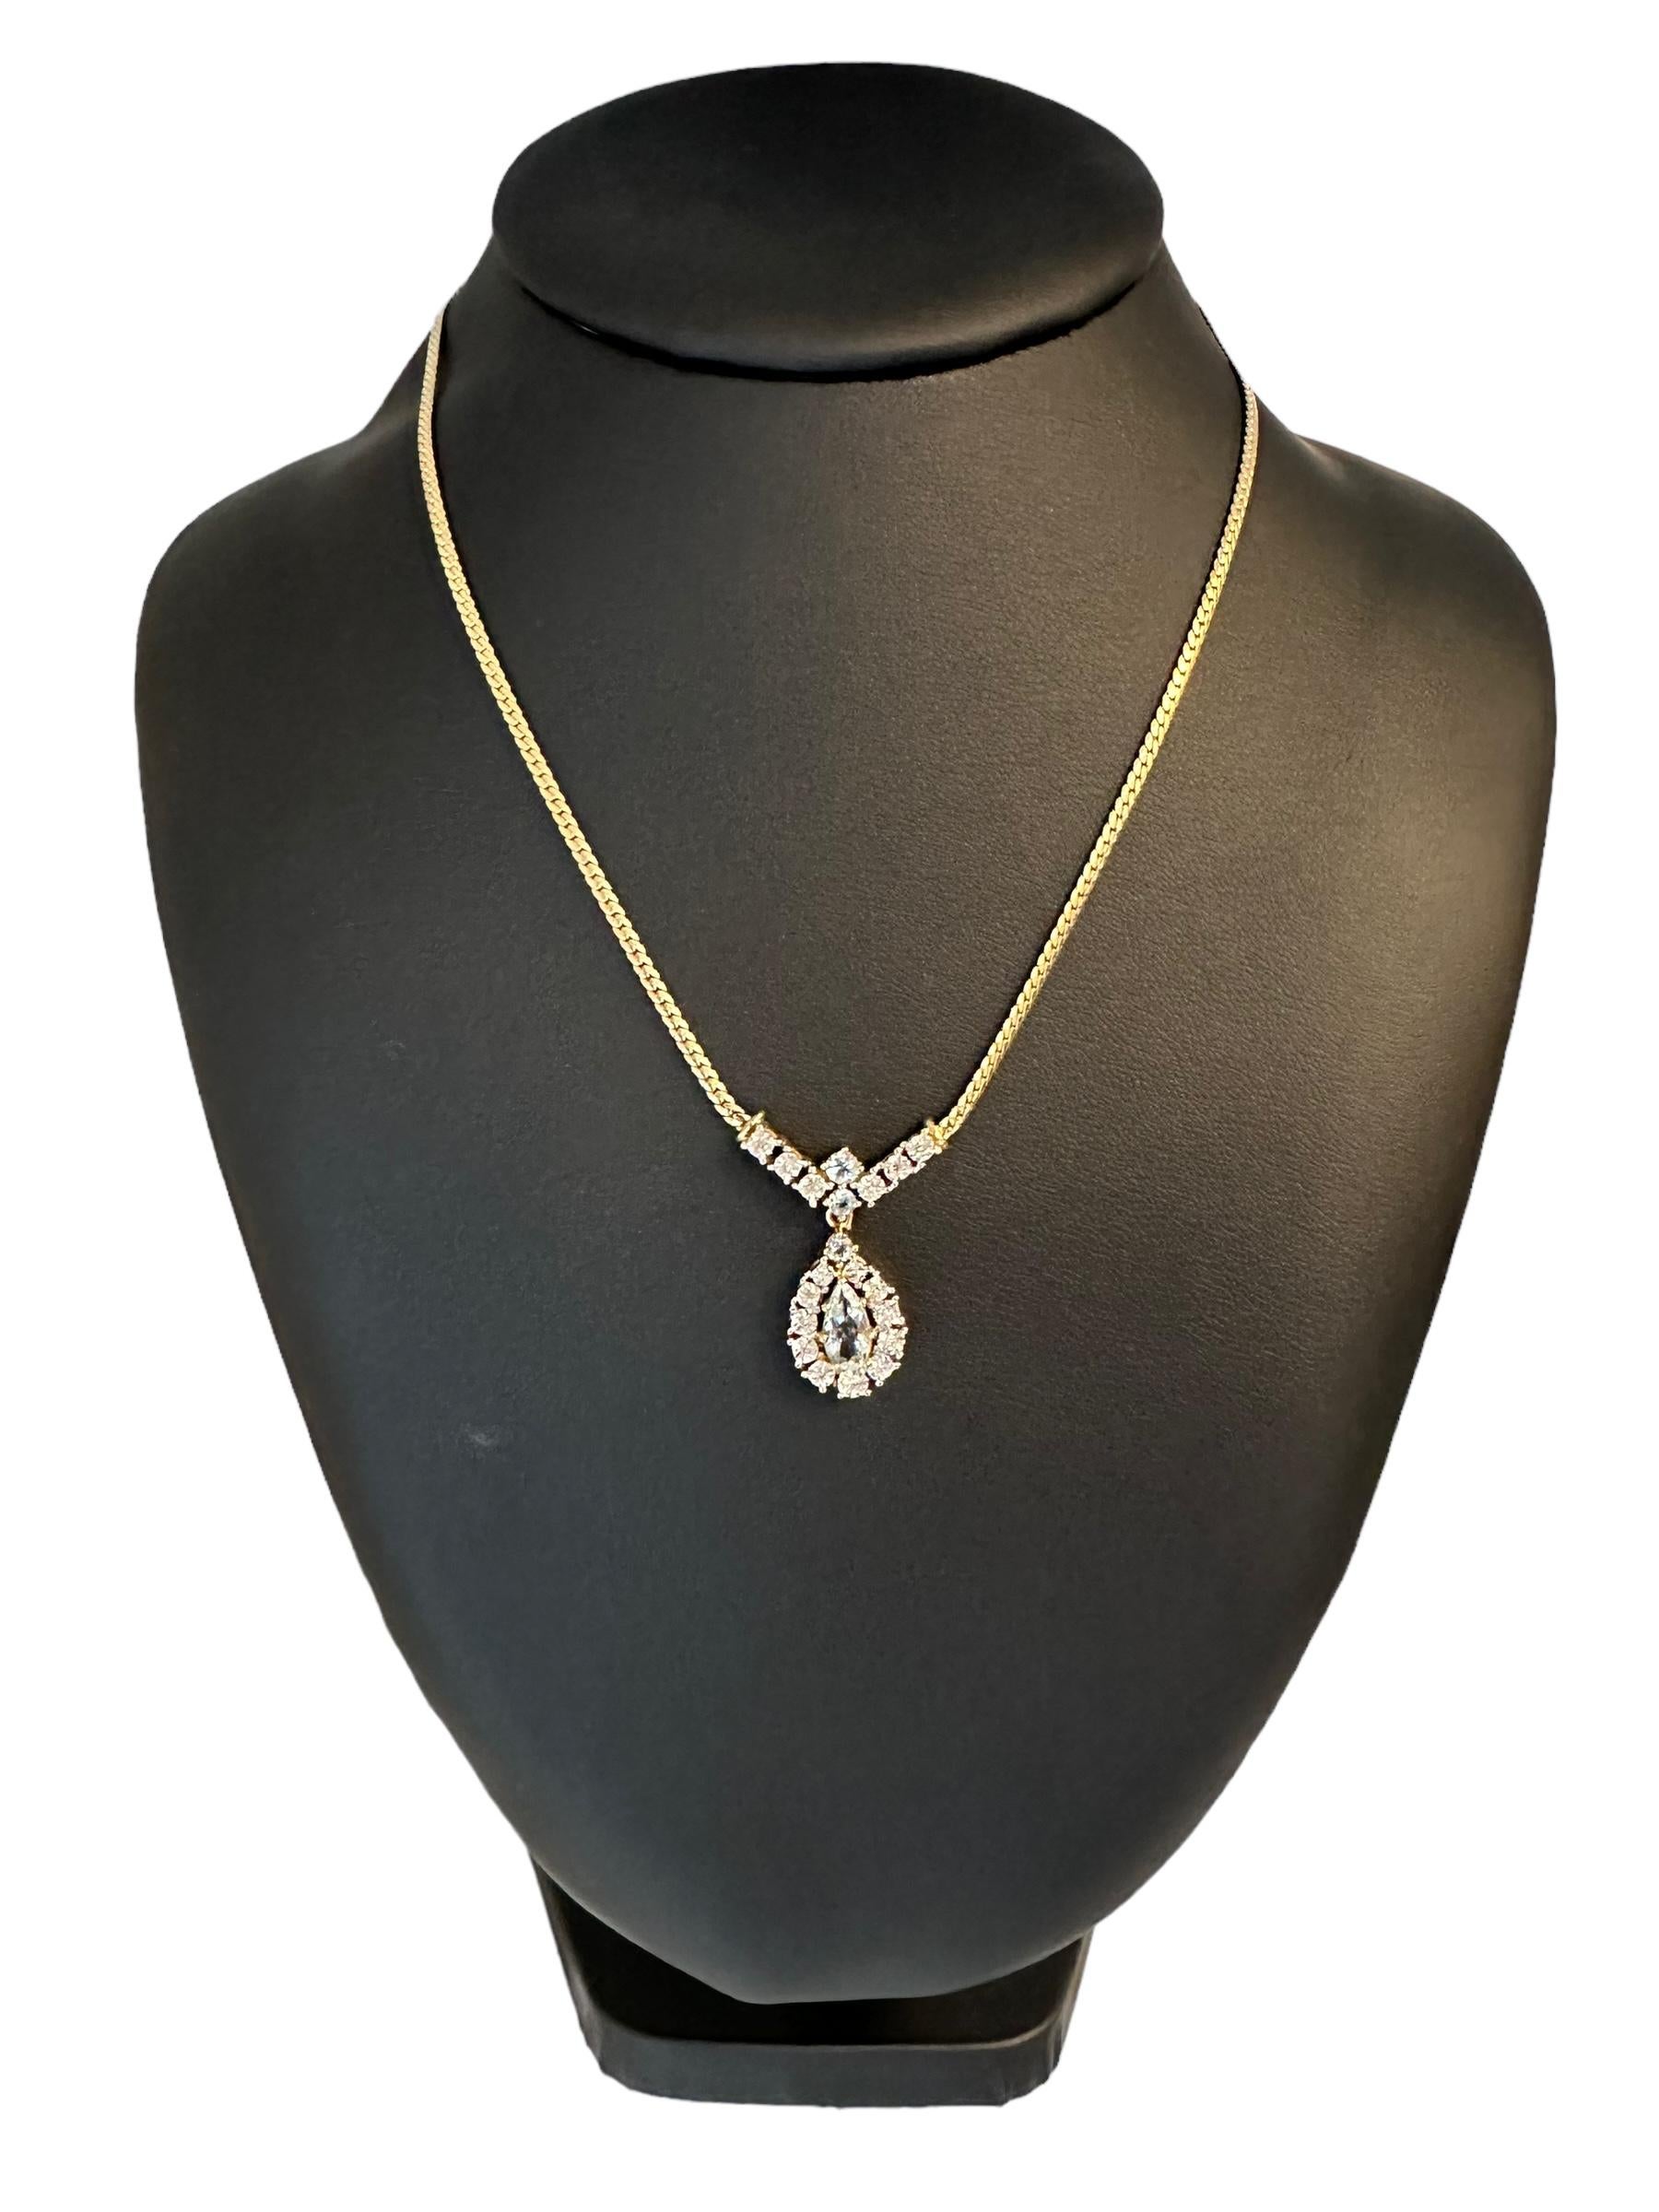 IGI Certified Gold Necklace with Diamonds and Aquamarines For Sale 3